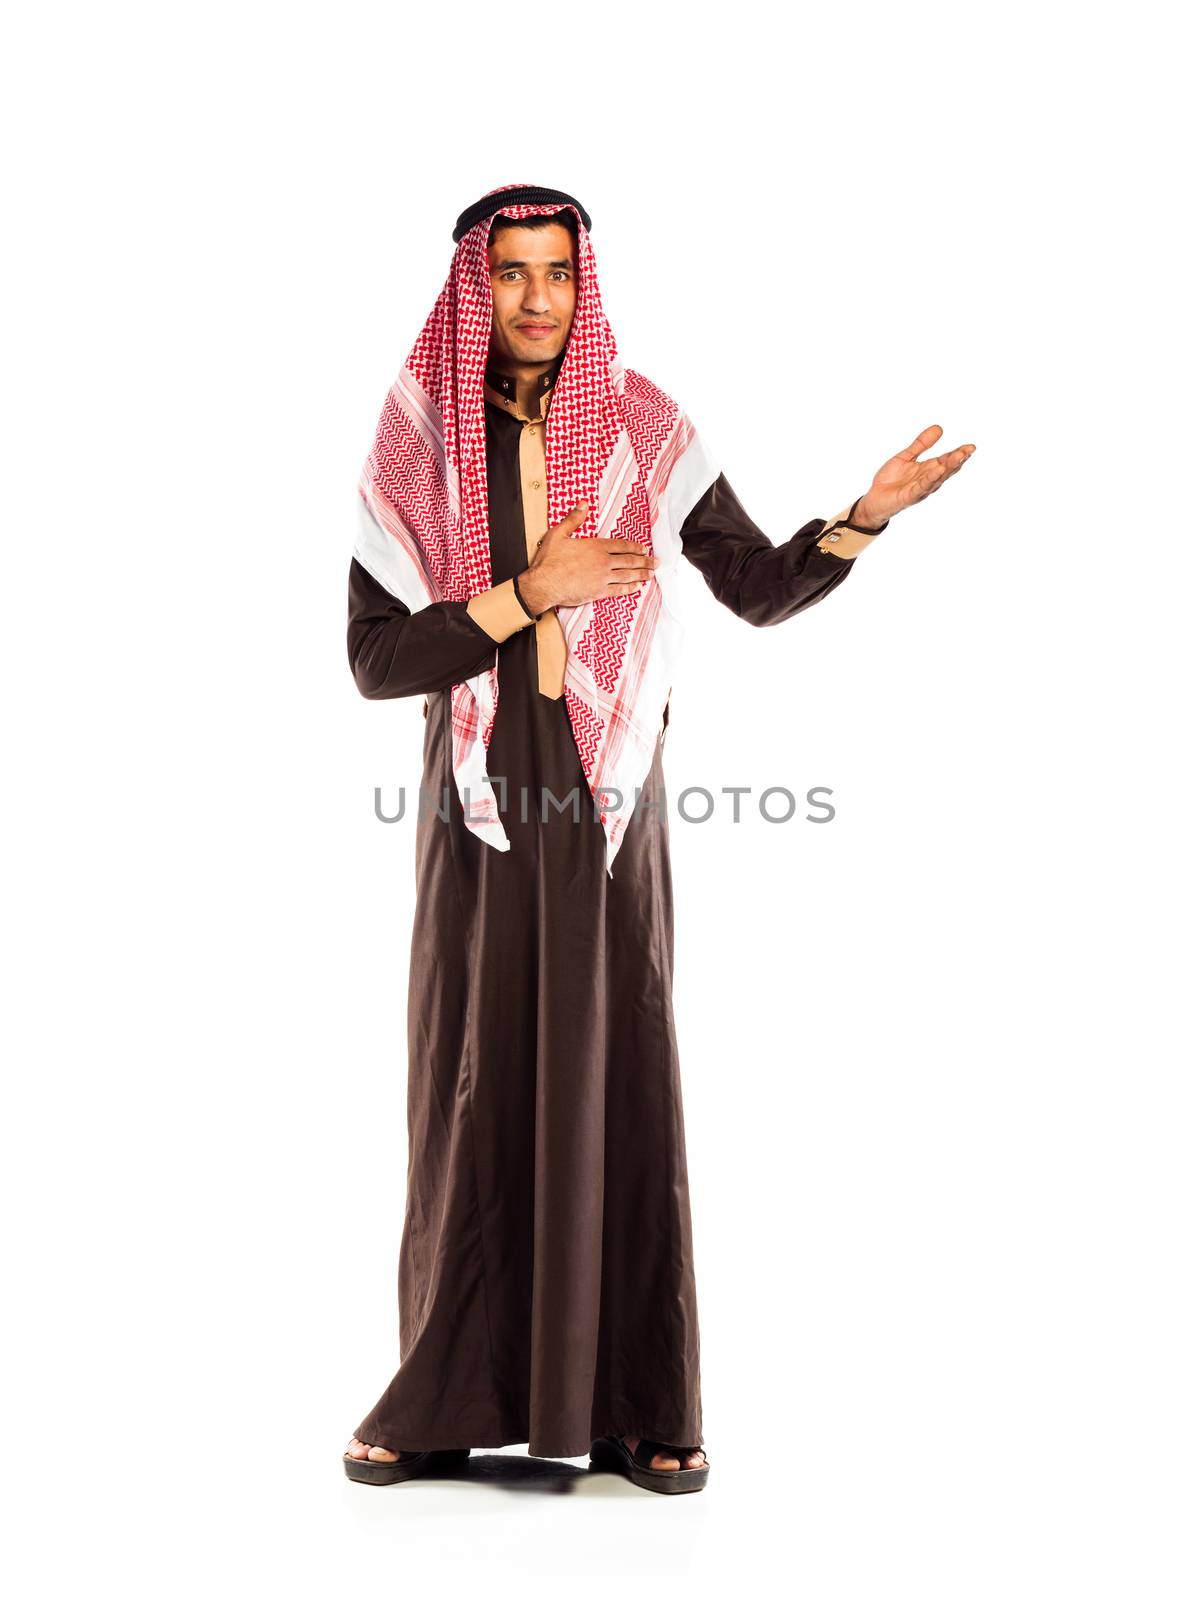 Young arab invites. Isolated on white background